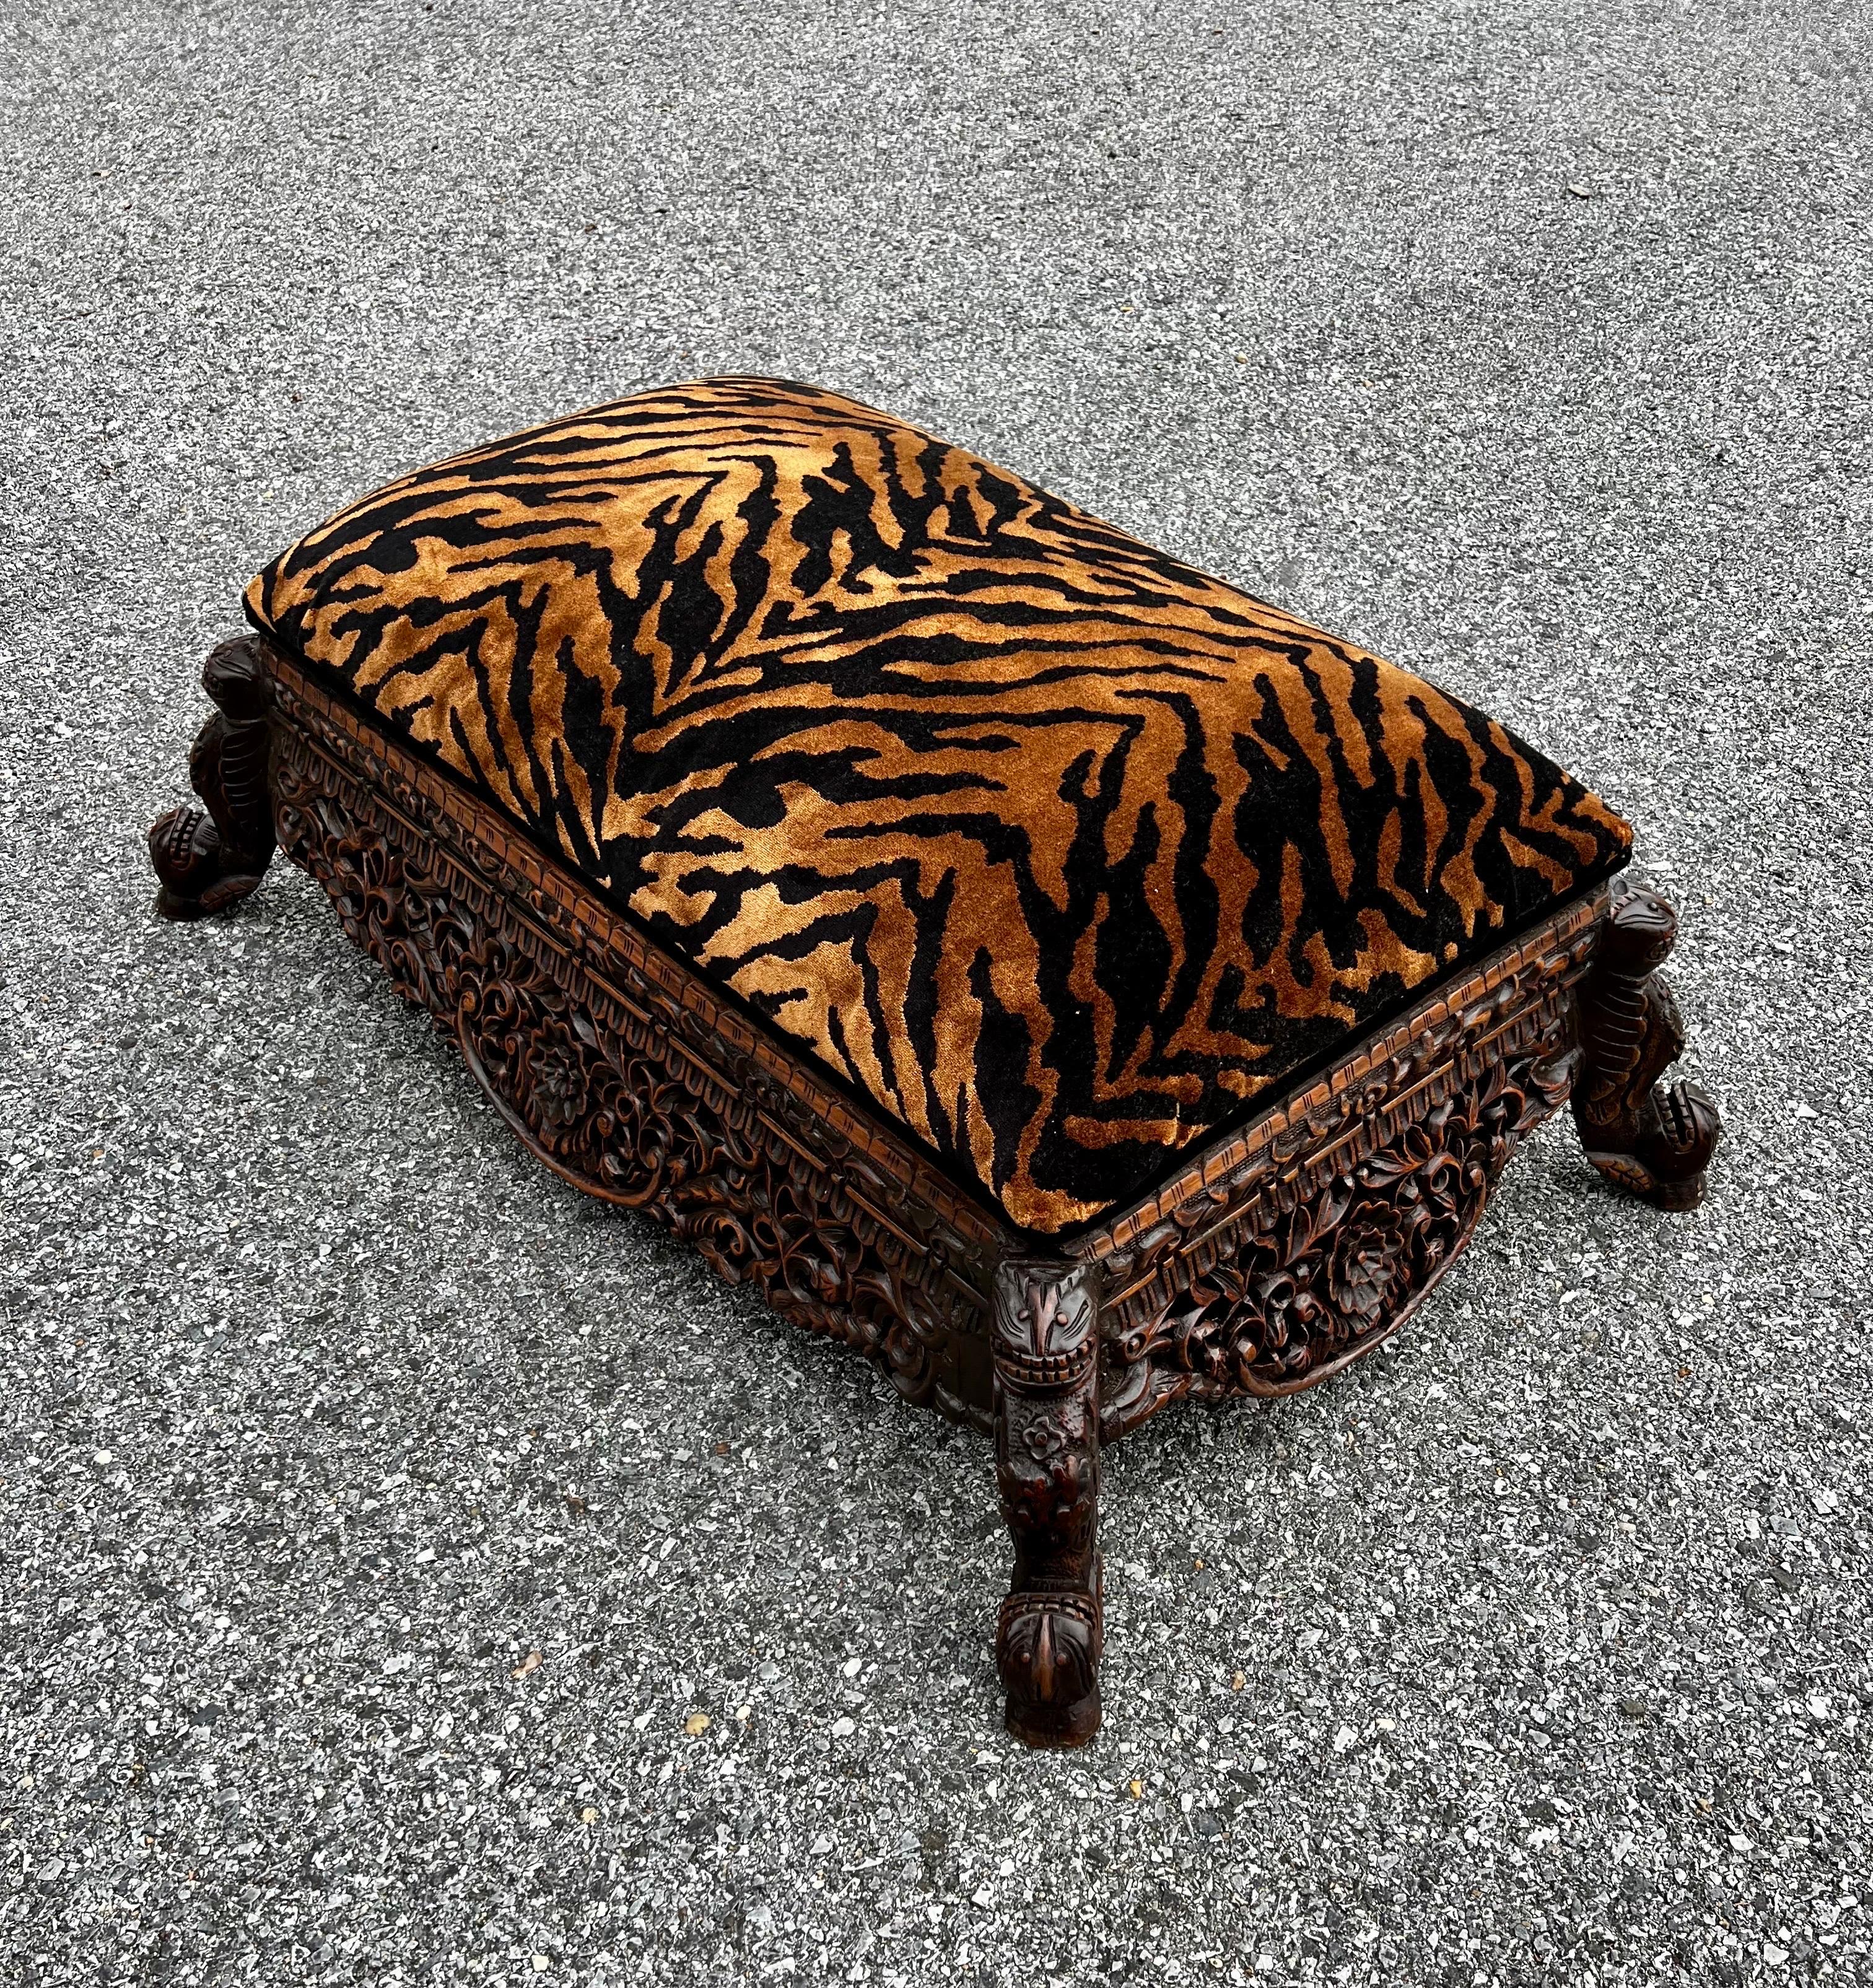 Refinished Late 19th Century Anglo-Indian Heavily Carved Tiger Velvet Ottoman  im Zustand „Gut“ im Angebot in Fort Washington, MD